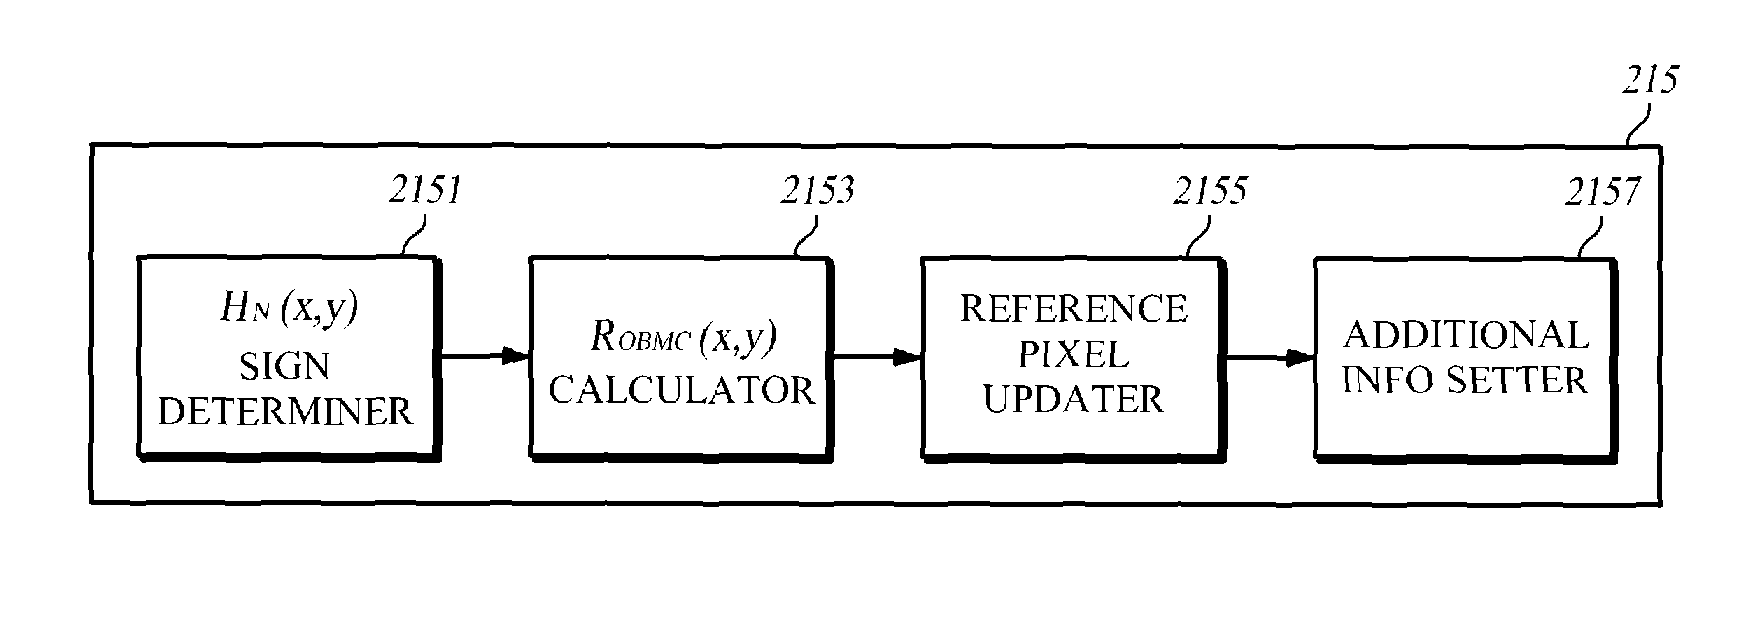 Video encoding/decoding apparatus and adaptive overlapped block motion compensation method and apparatus employing adaptive weights therefor